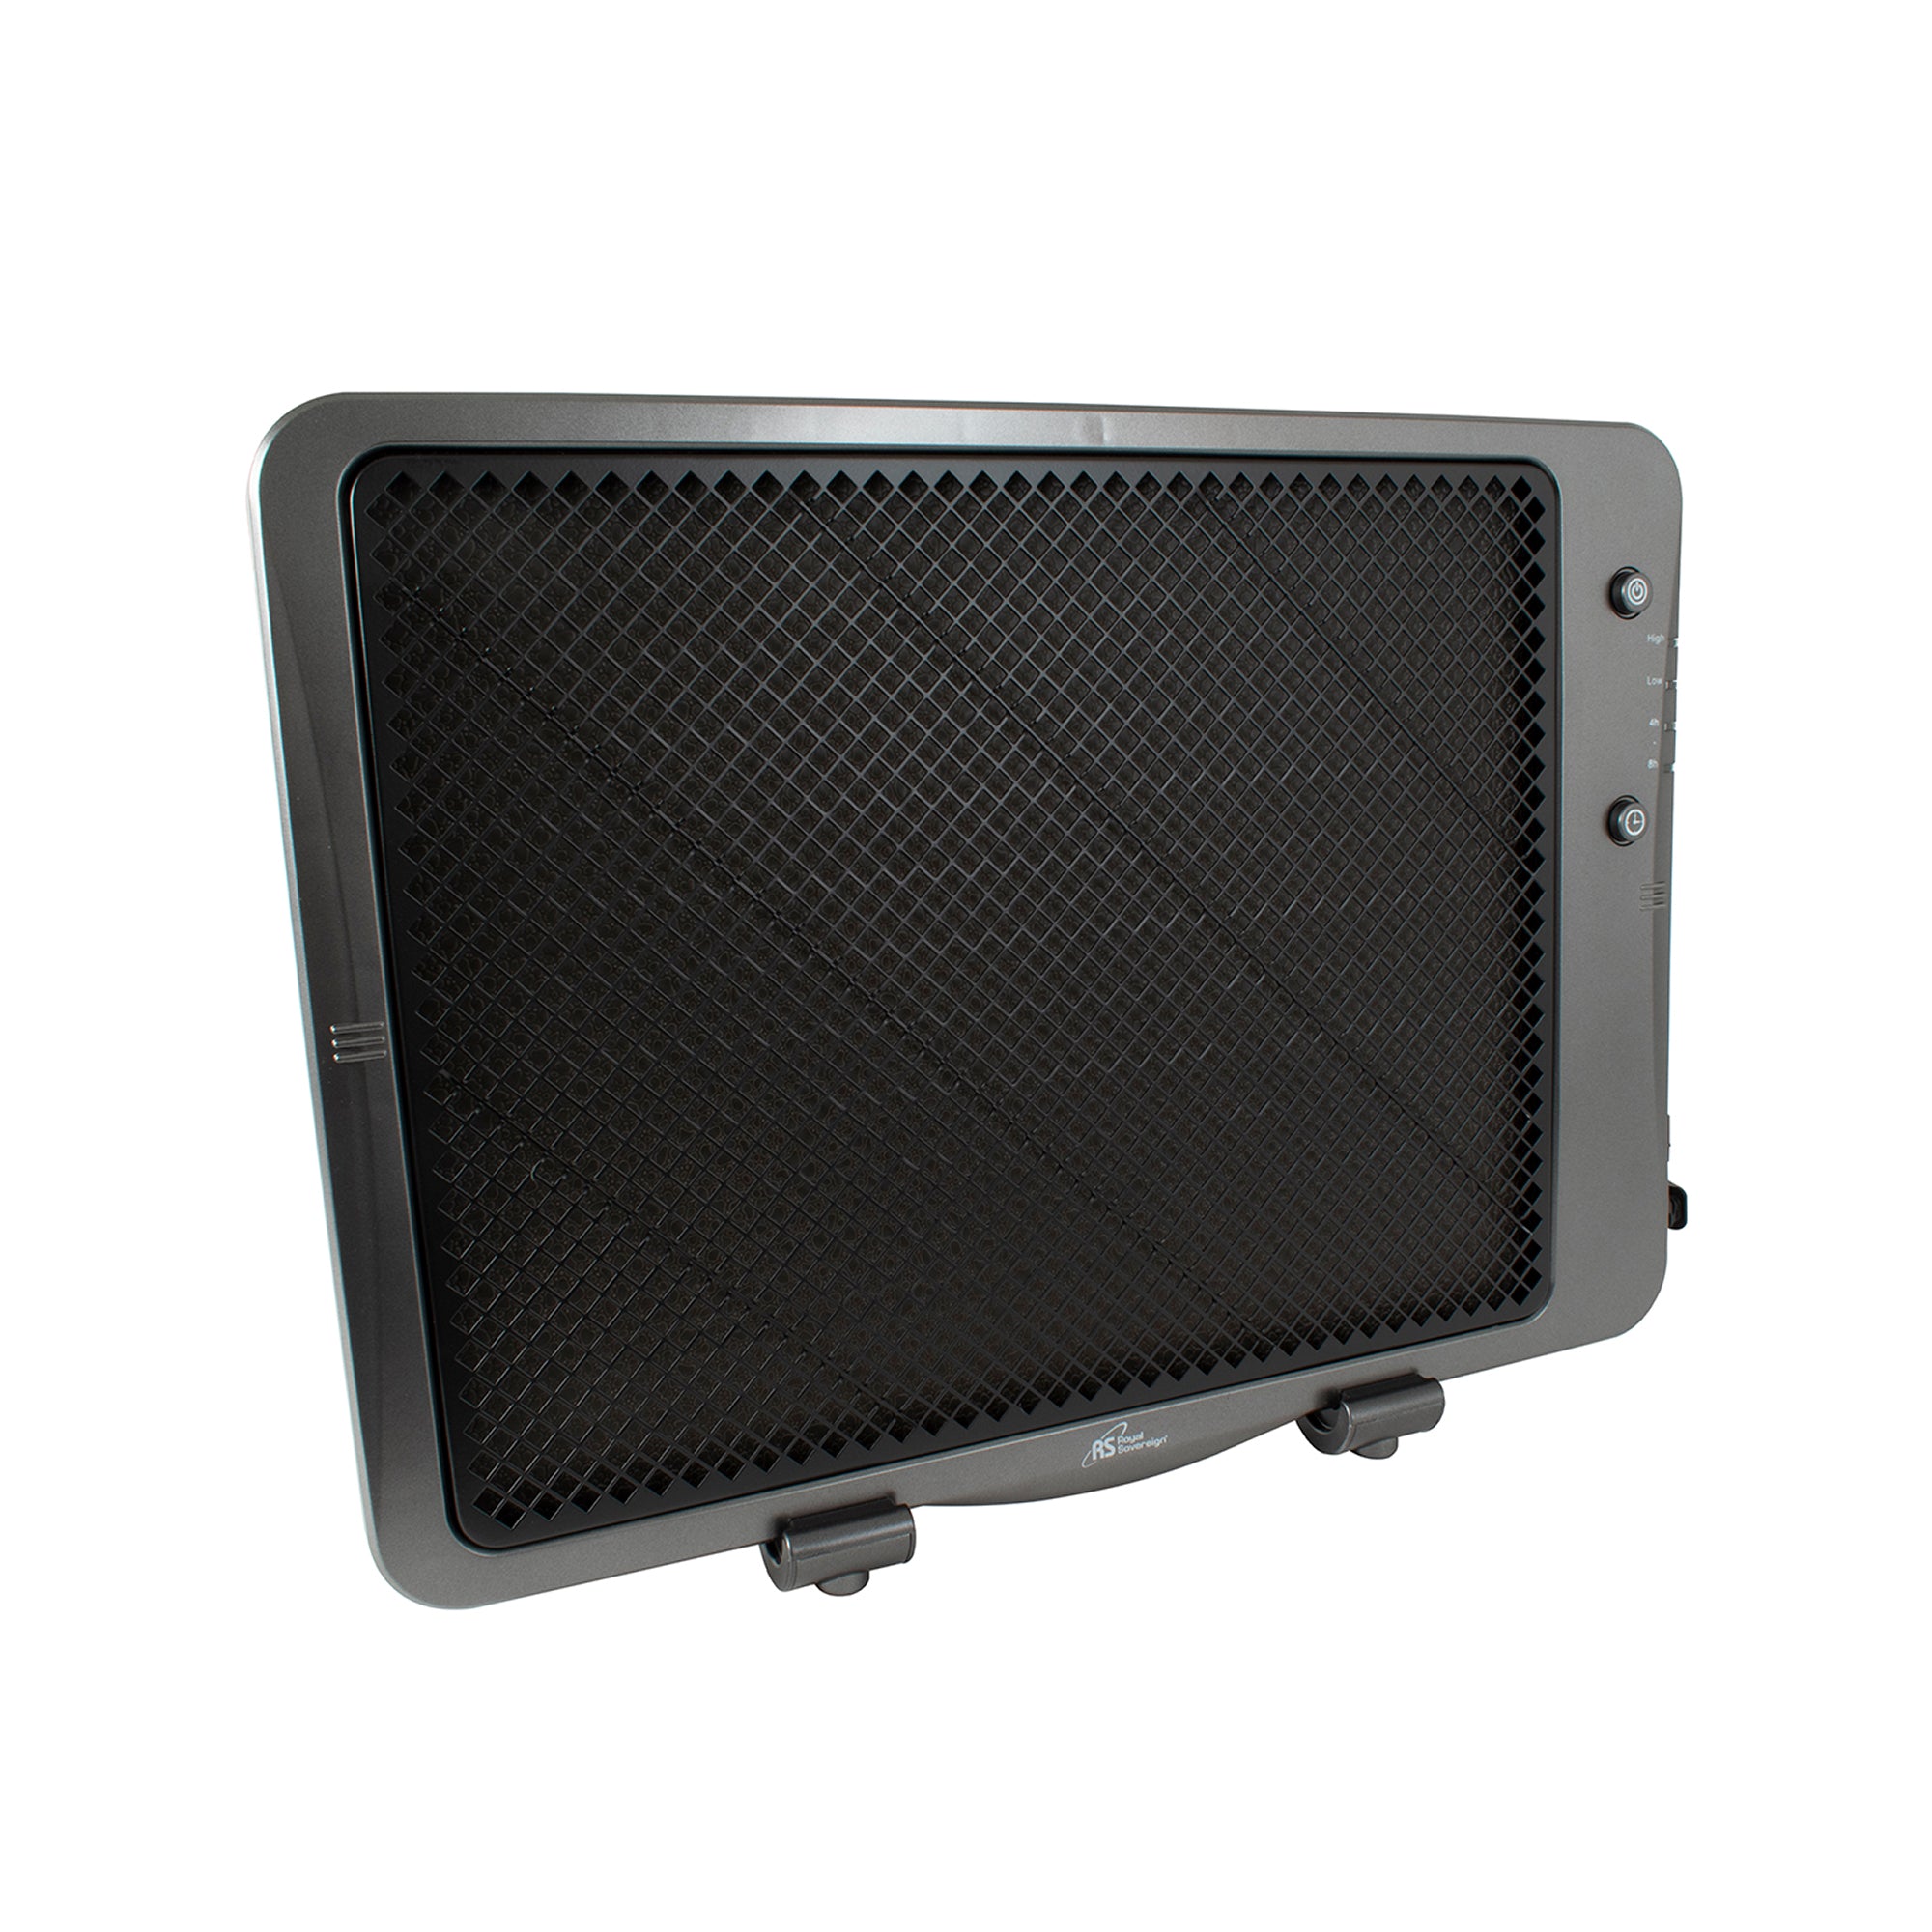 RPH-260G, Infrared Panel Heater, Wall Mounting Option